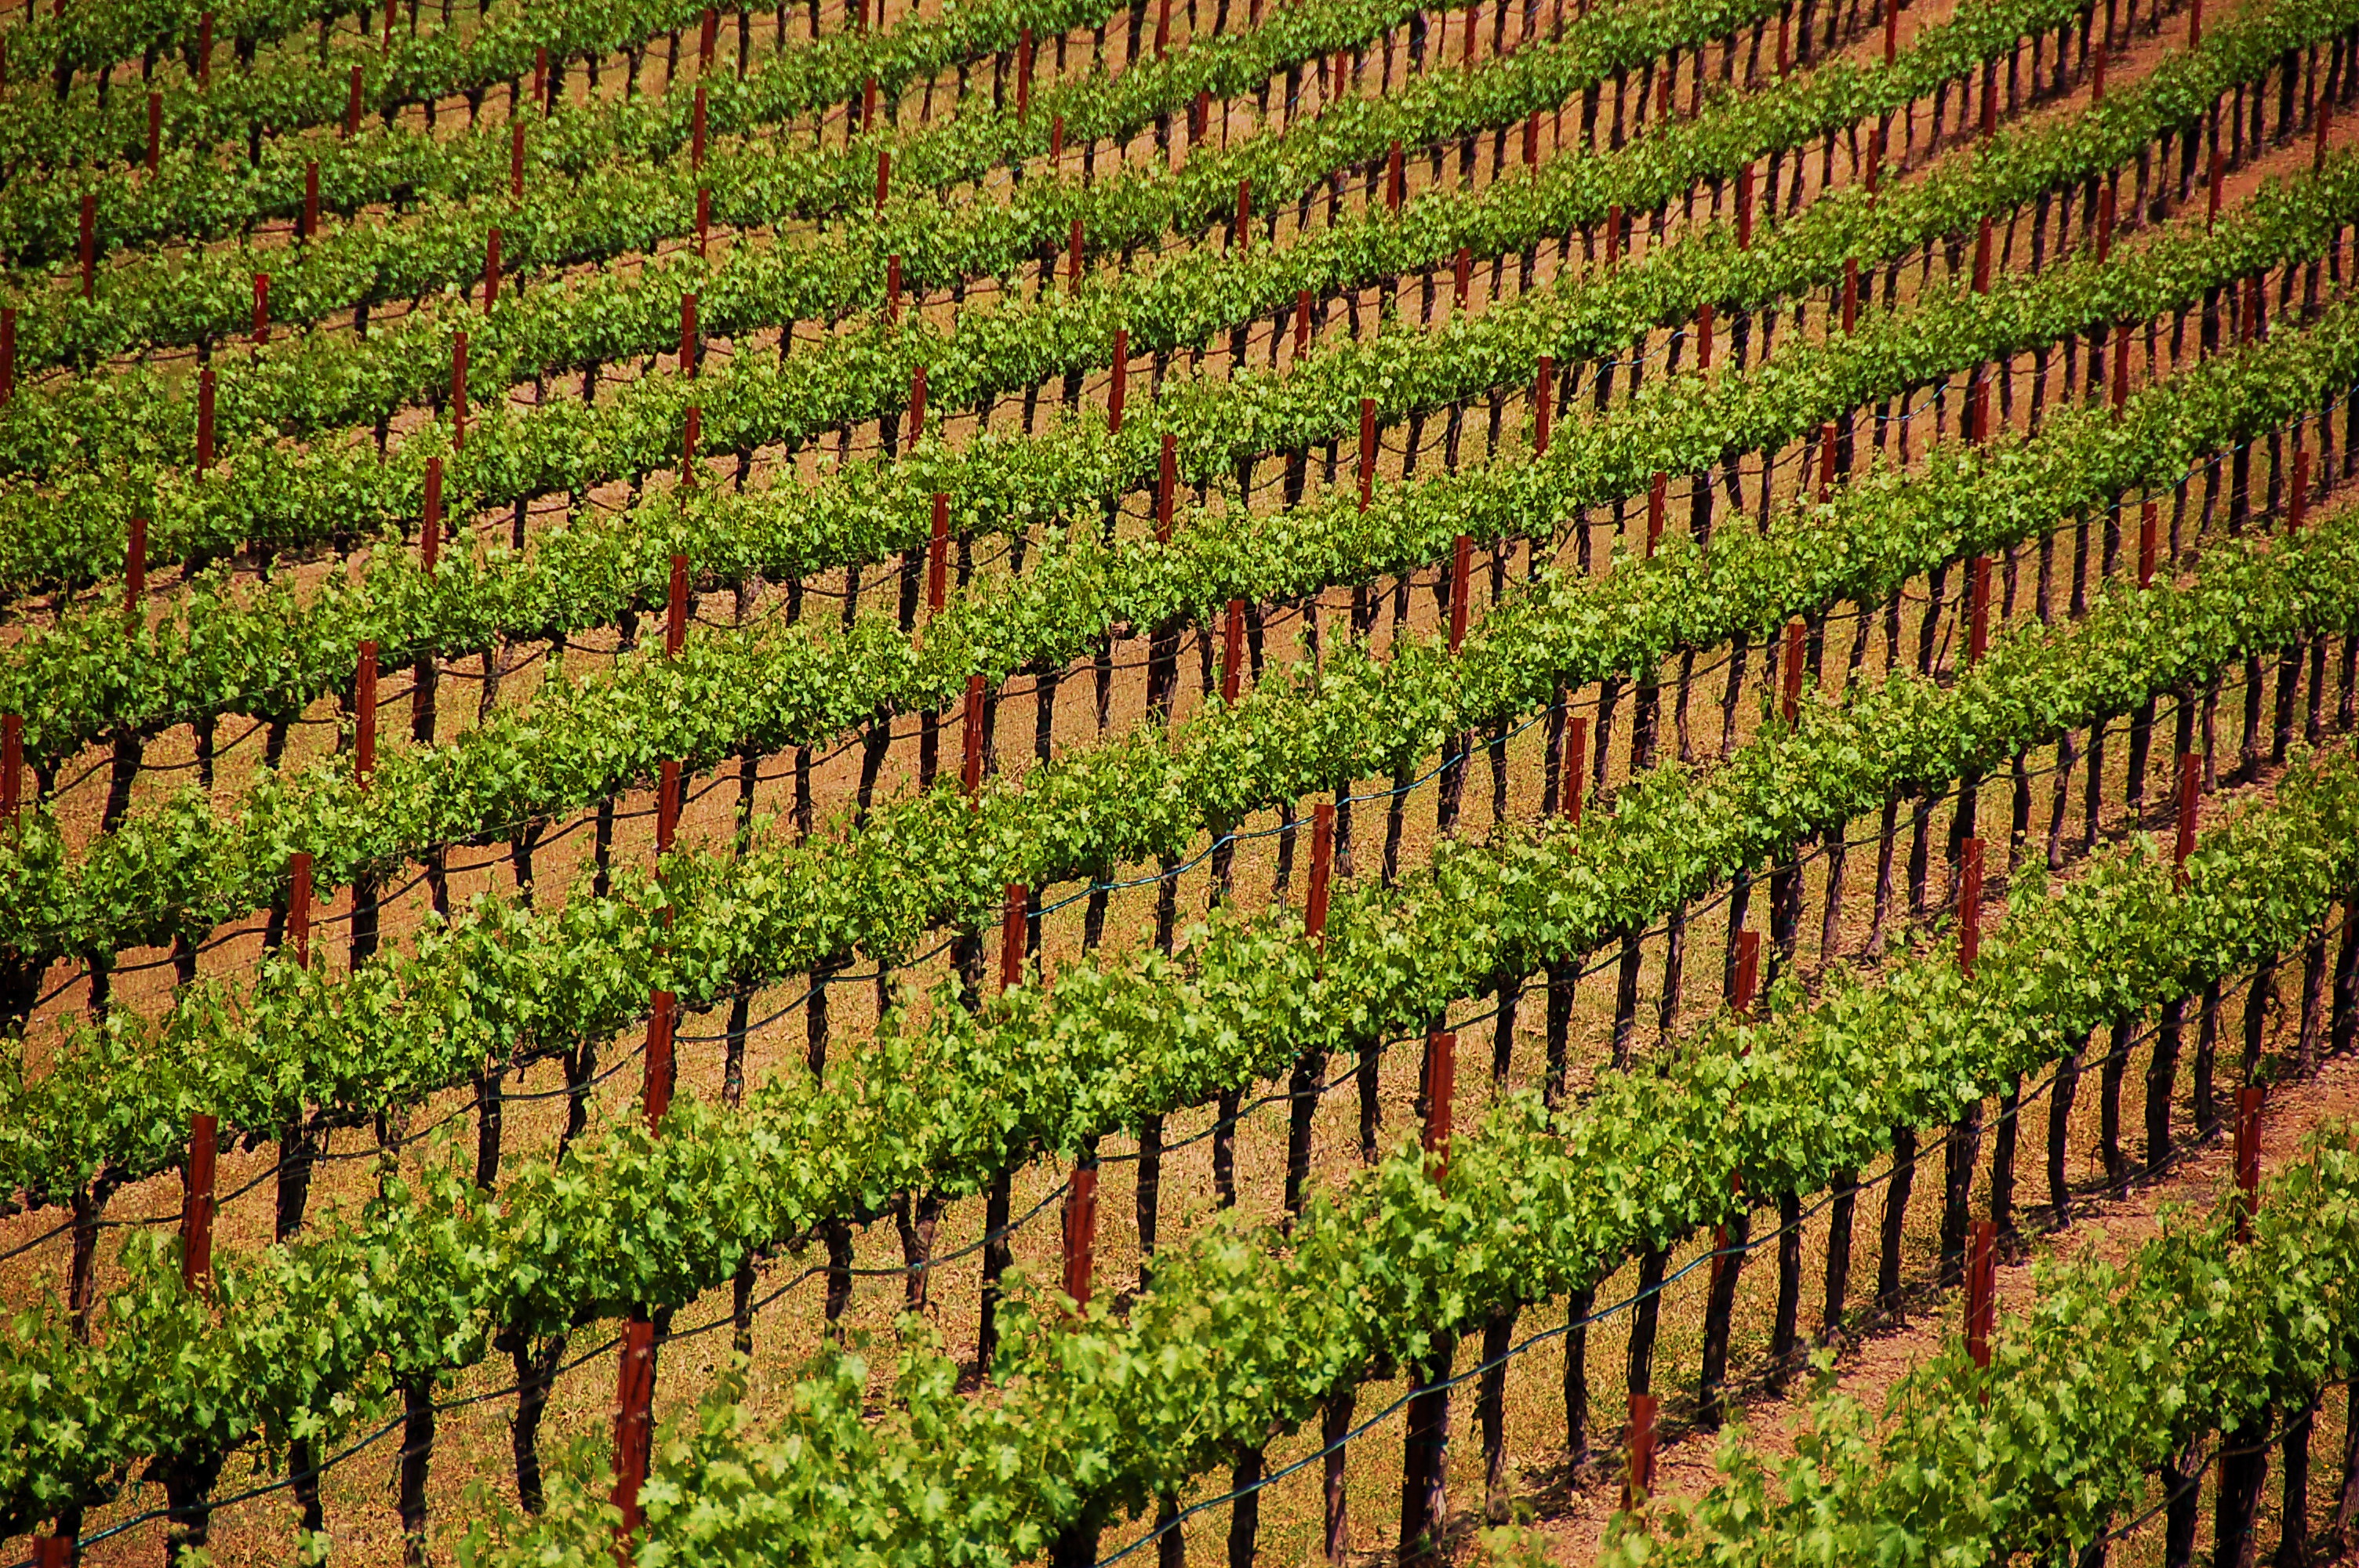 Rows of flowering grapevines in the full sunshine.